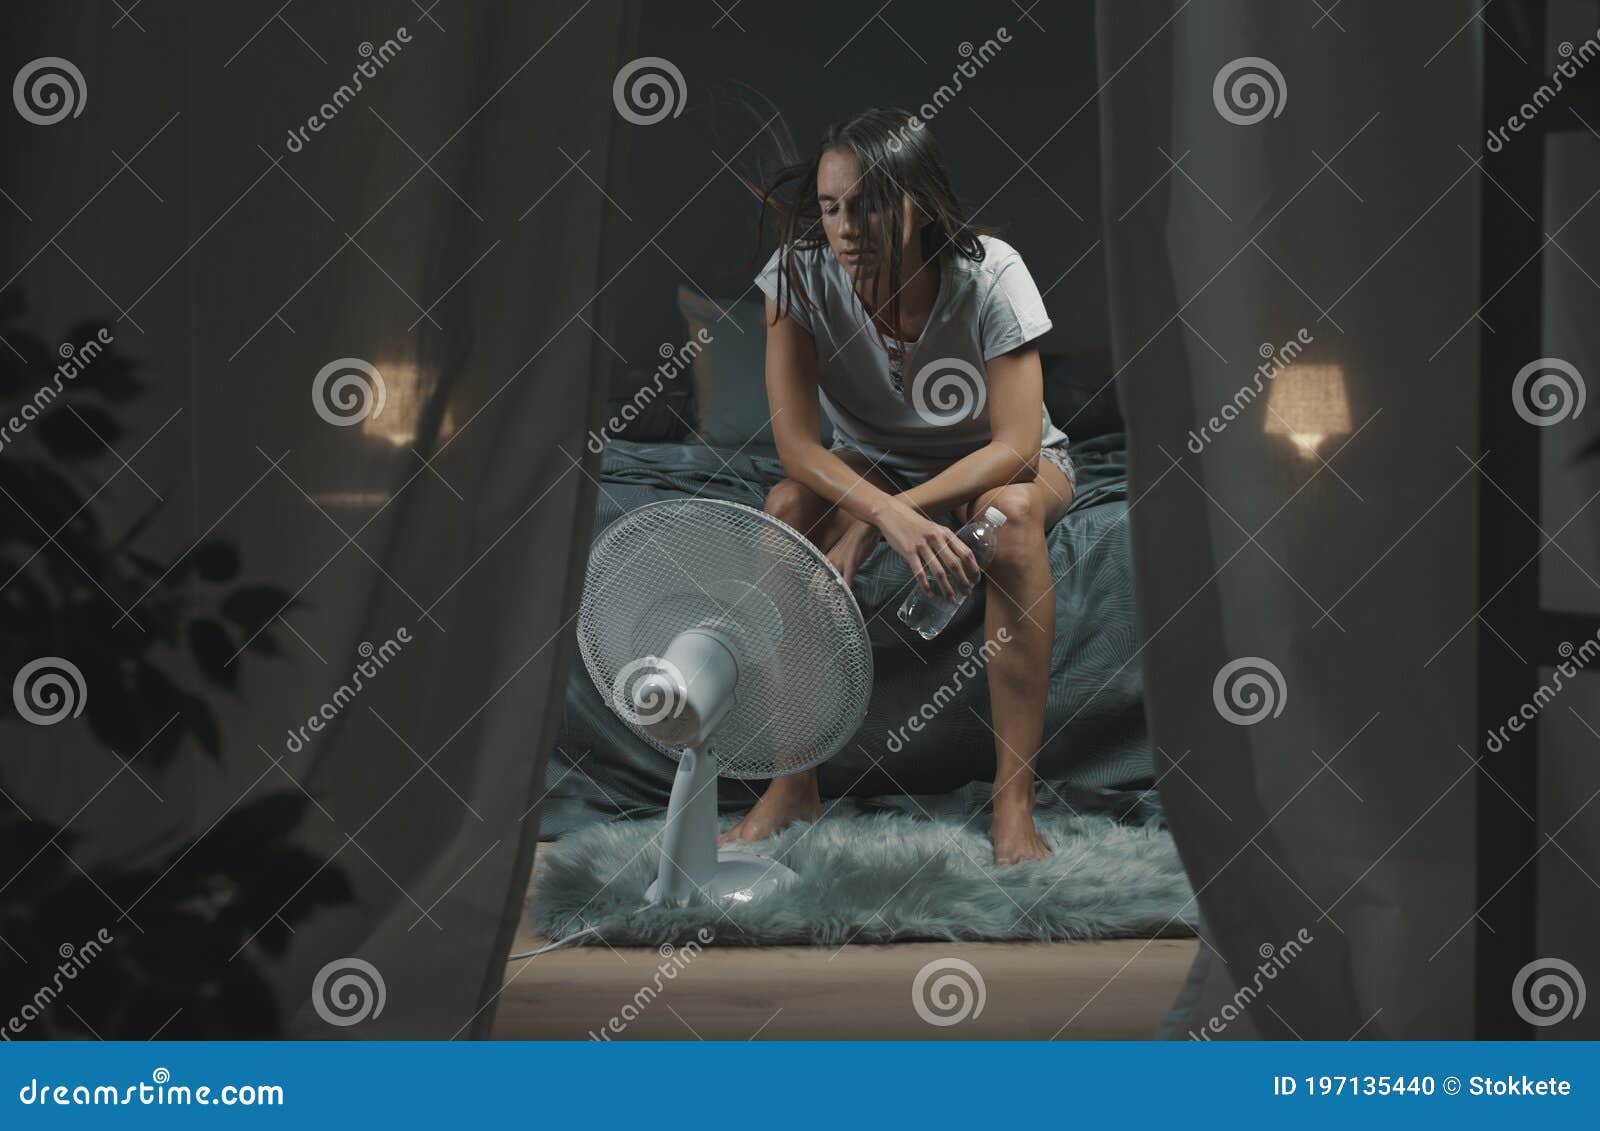 woman in bedroom suffering during a heatwave